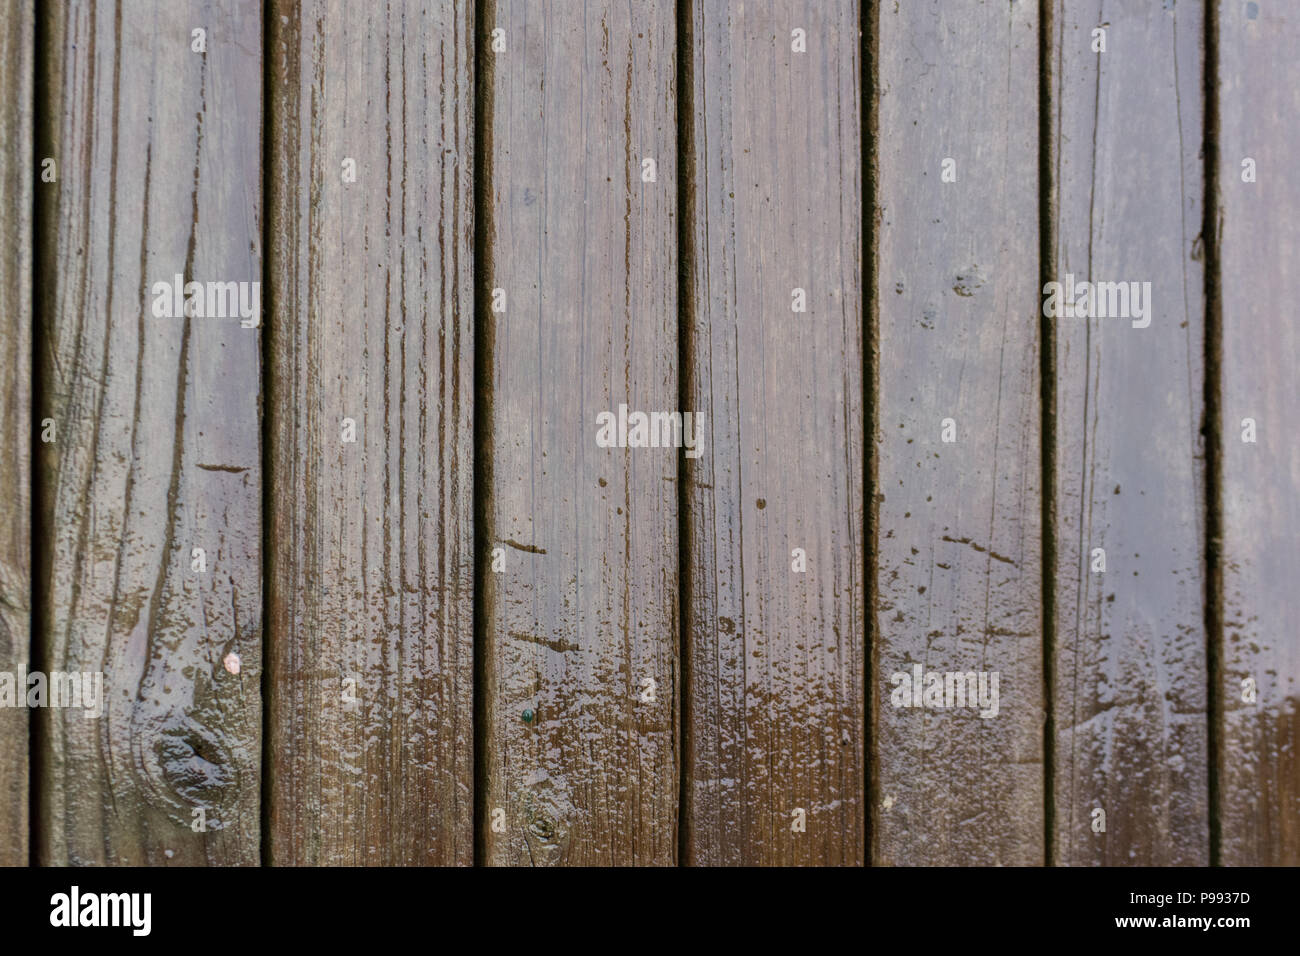 Wooden deck being rained on Stock Photo